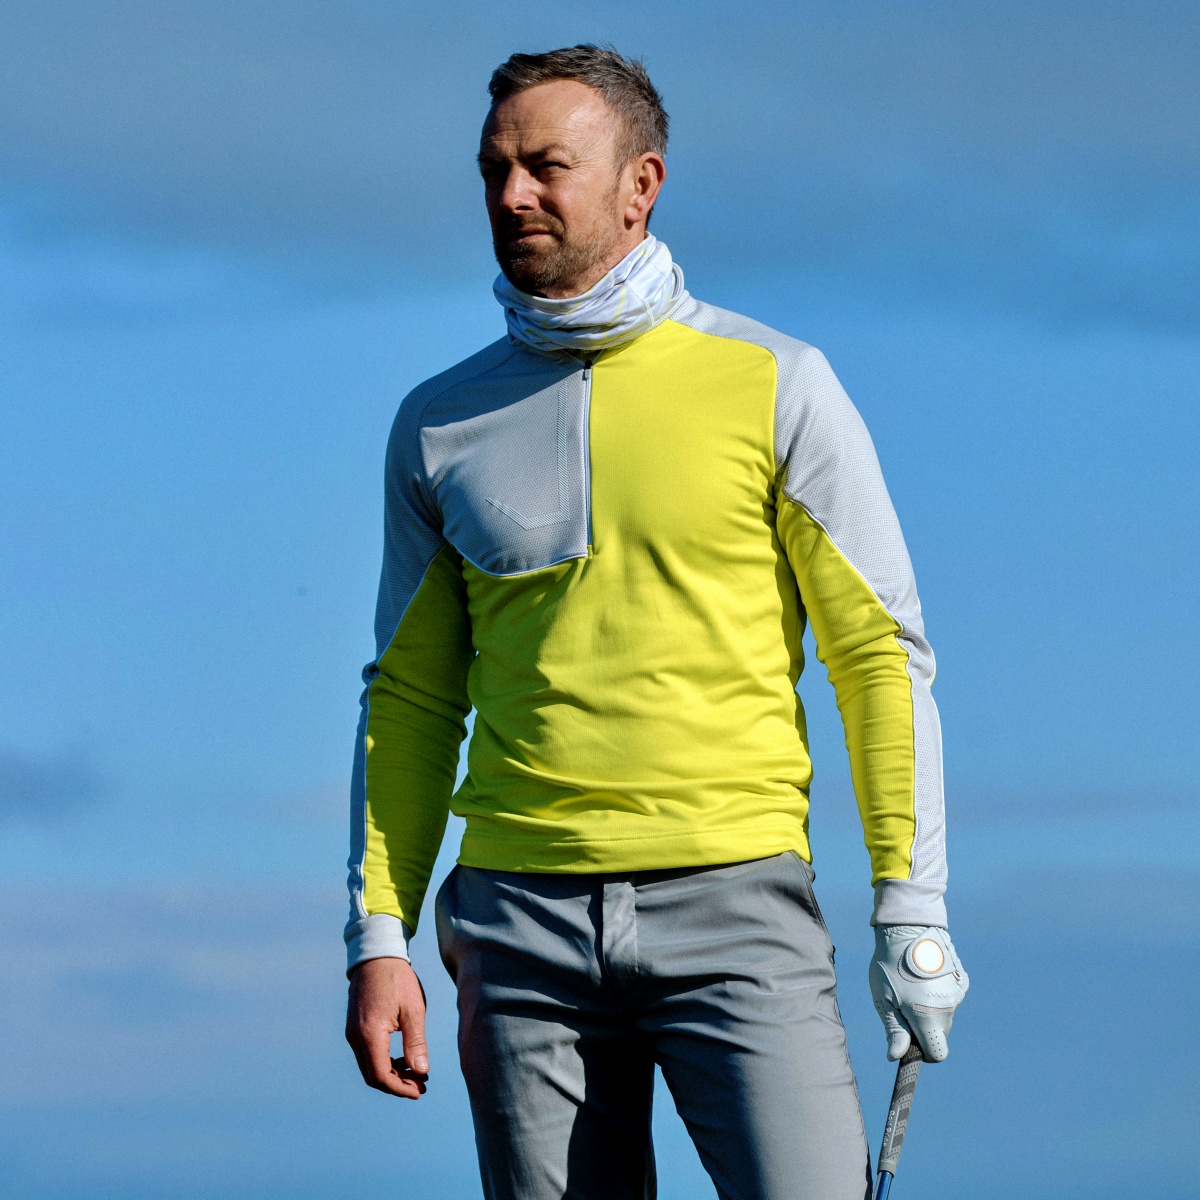 ❄️🍂 Galvin Green Autumn/Winter Collection - Now Available The latest cold weather range from Galvin Green has arrived in-store and online at Affordable Golf. Visit your local Affordable Golf store today, or view the full range online at - tinyurl.com/zb4udhdd